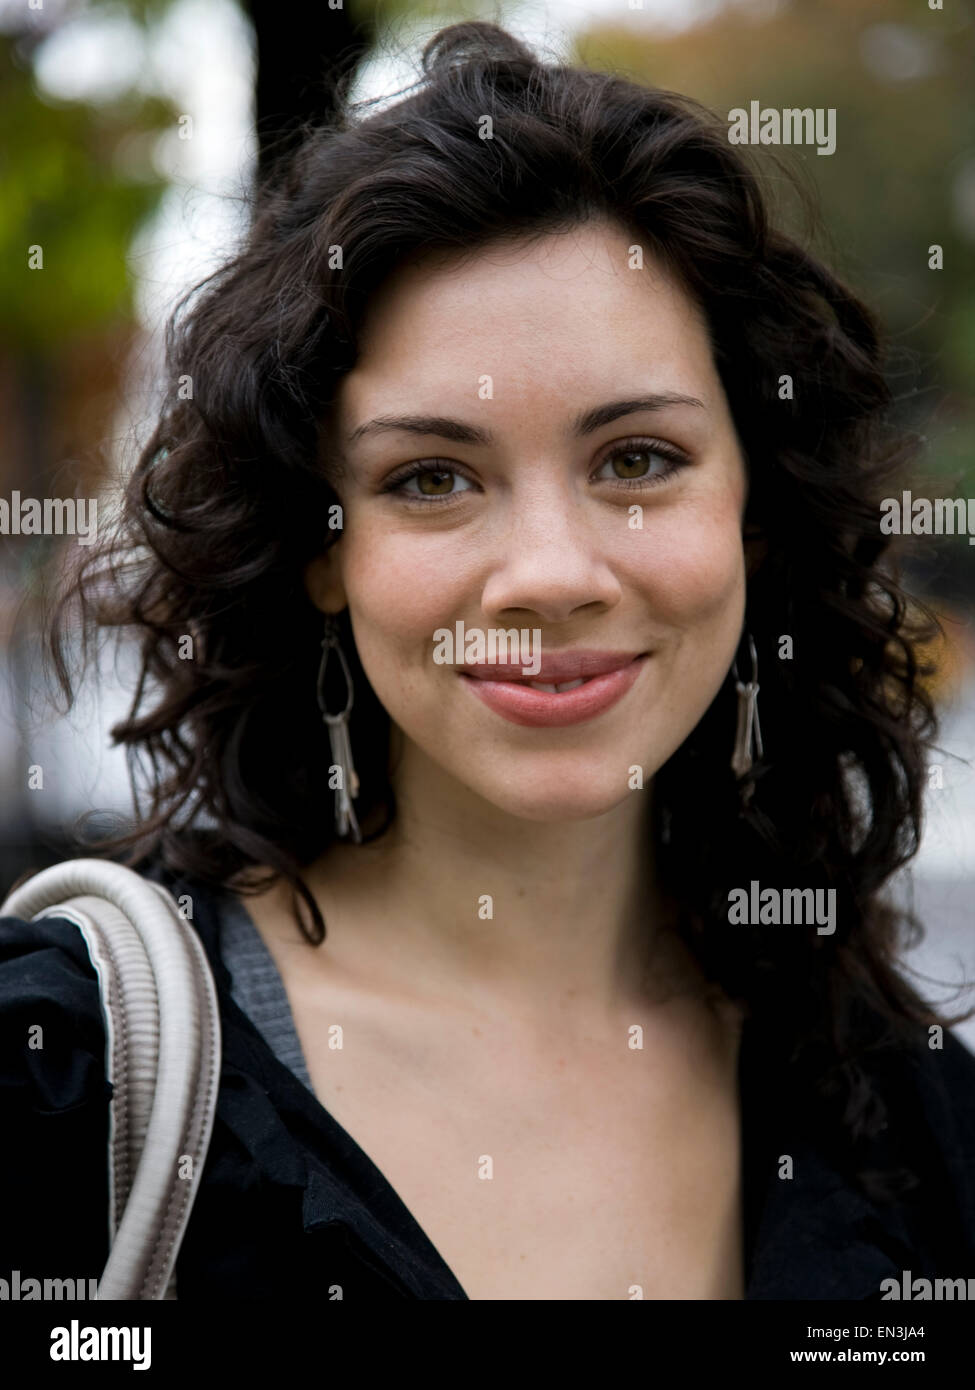 USA, New York, Manhattan, Greenwich Village, Portrait of smiling young woman Stock Photo